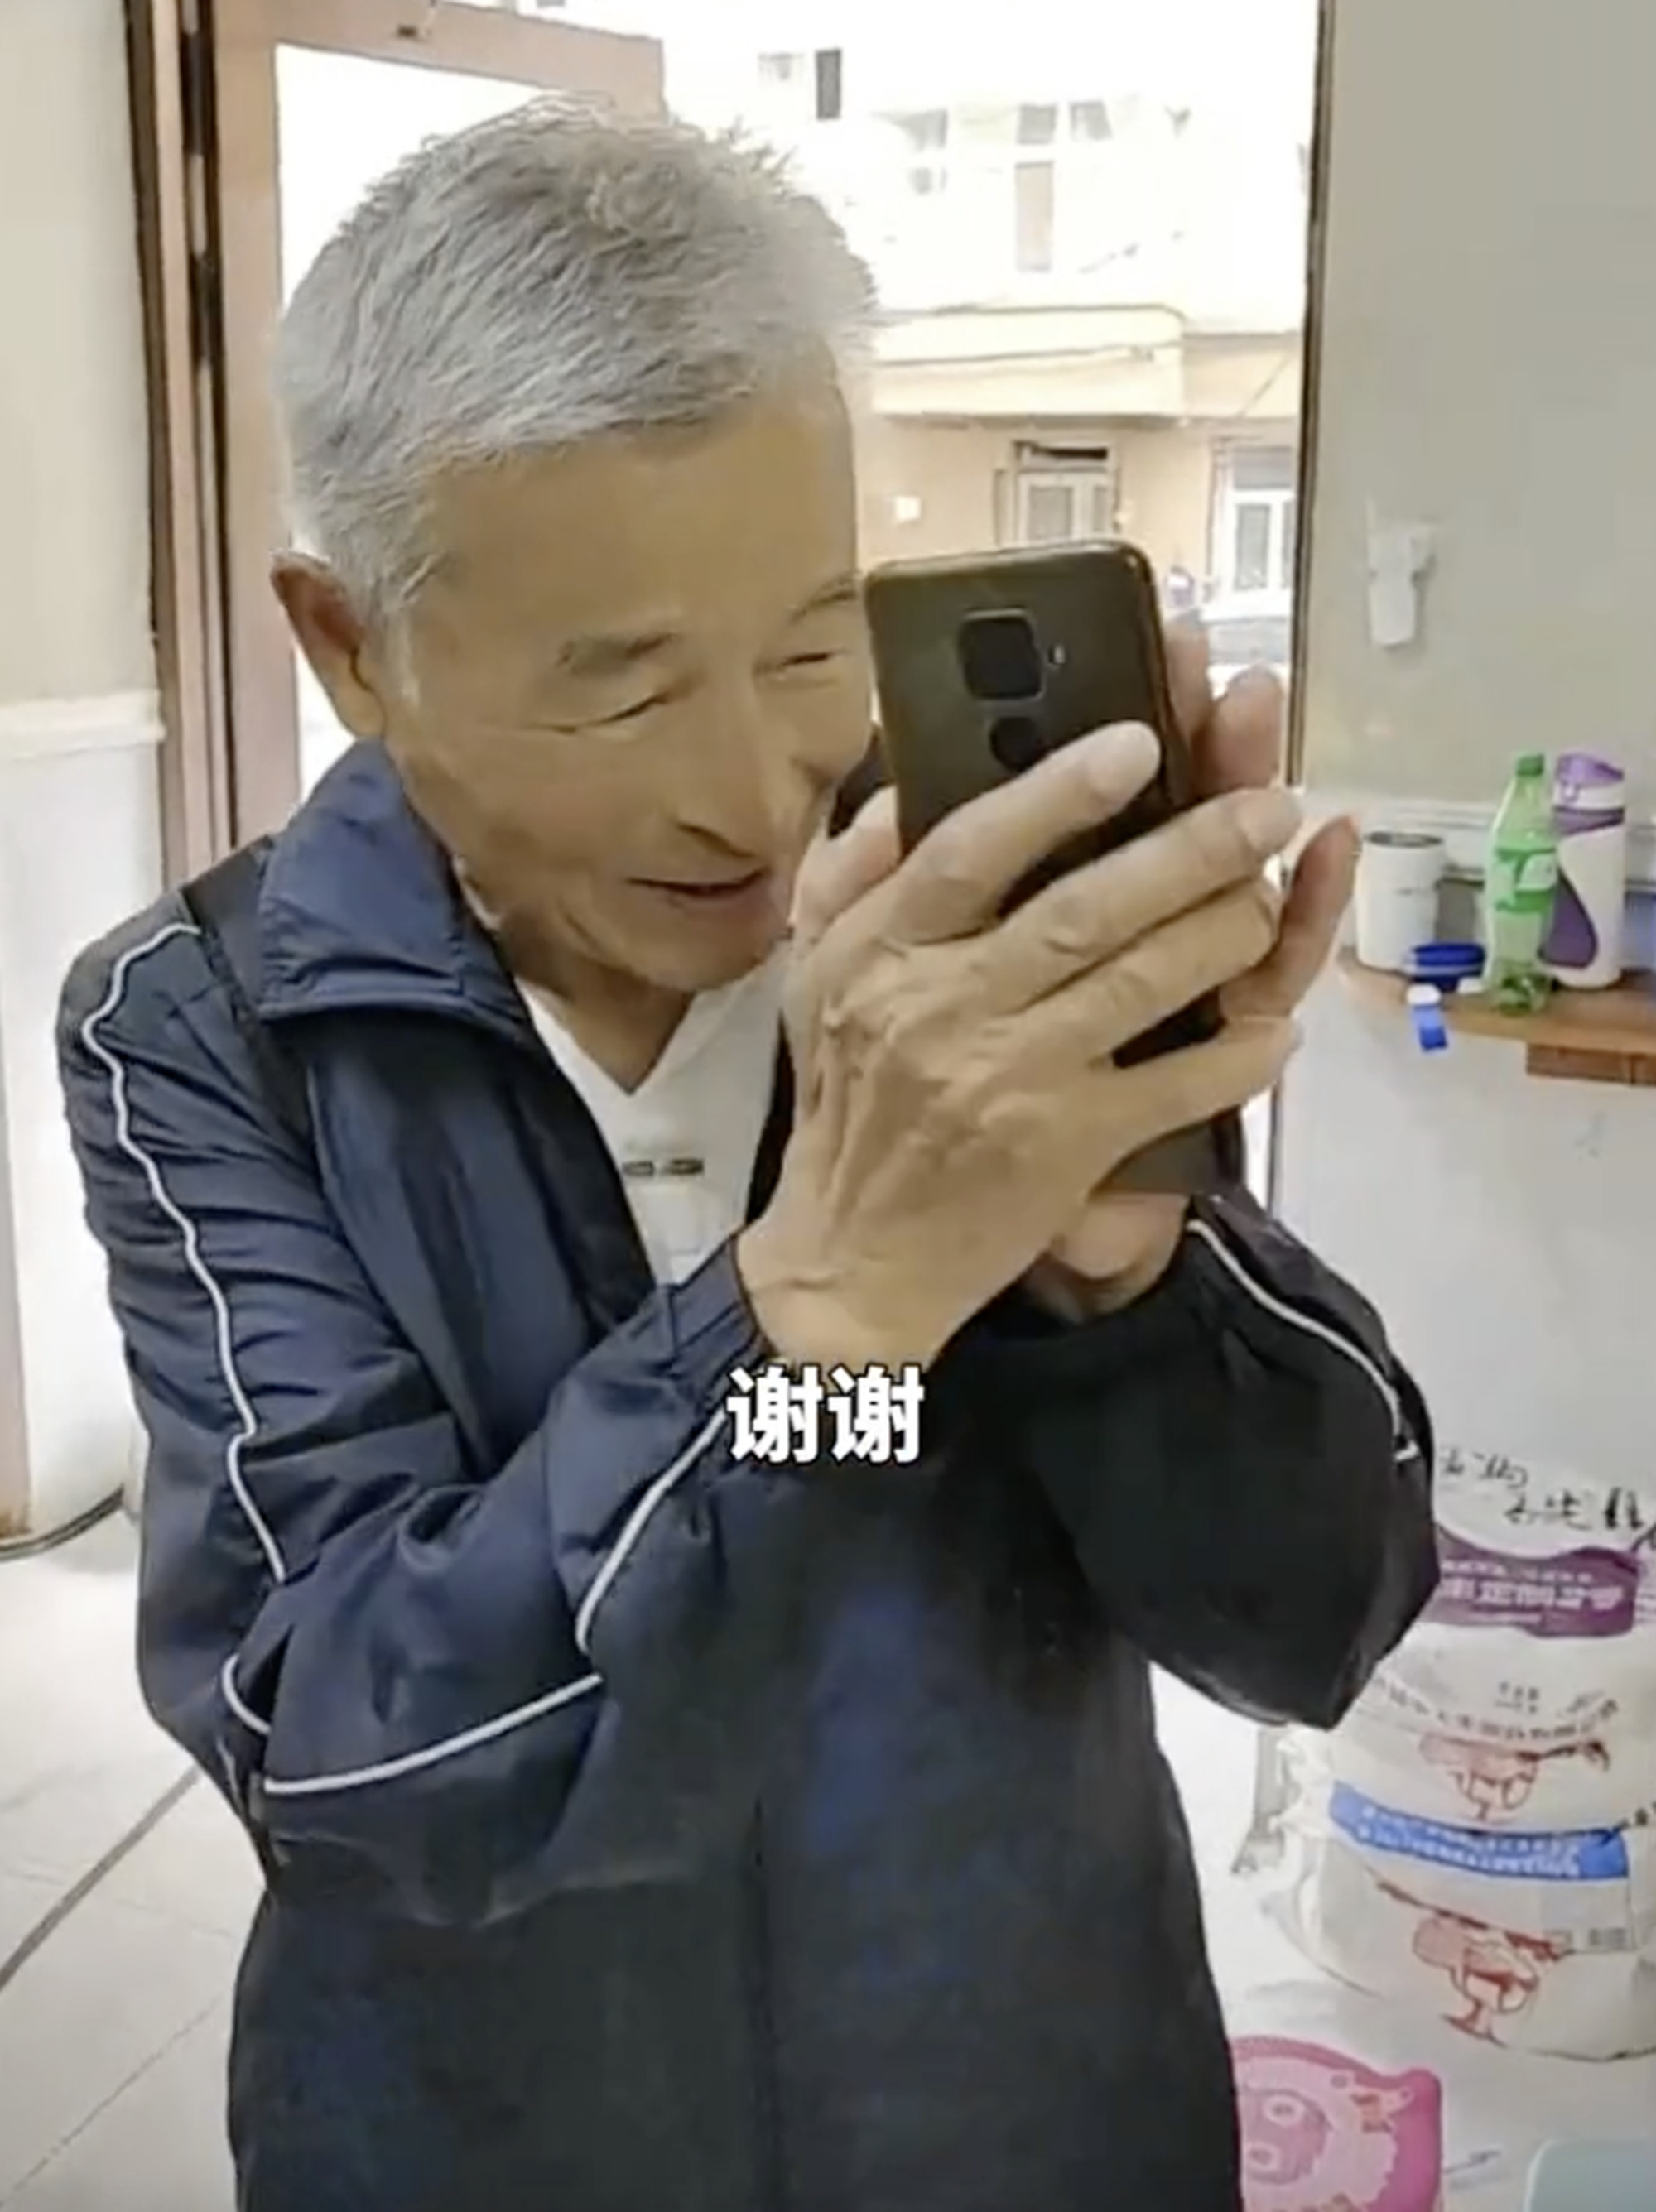 83-year-old Zhan Guowen thanks the honest baker for his efforts in tracking him down. Photo: Douyin